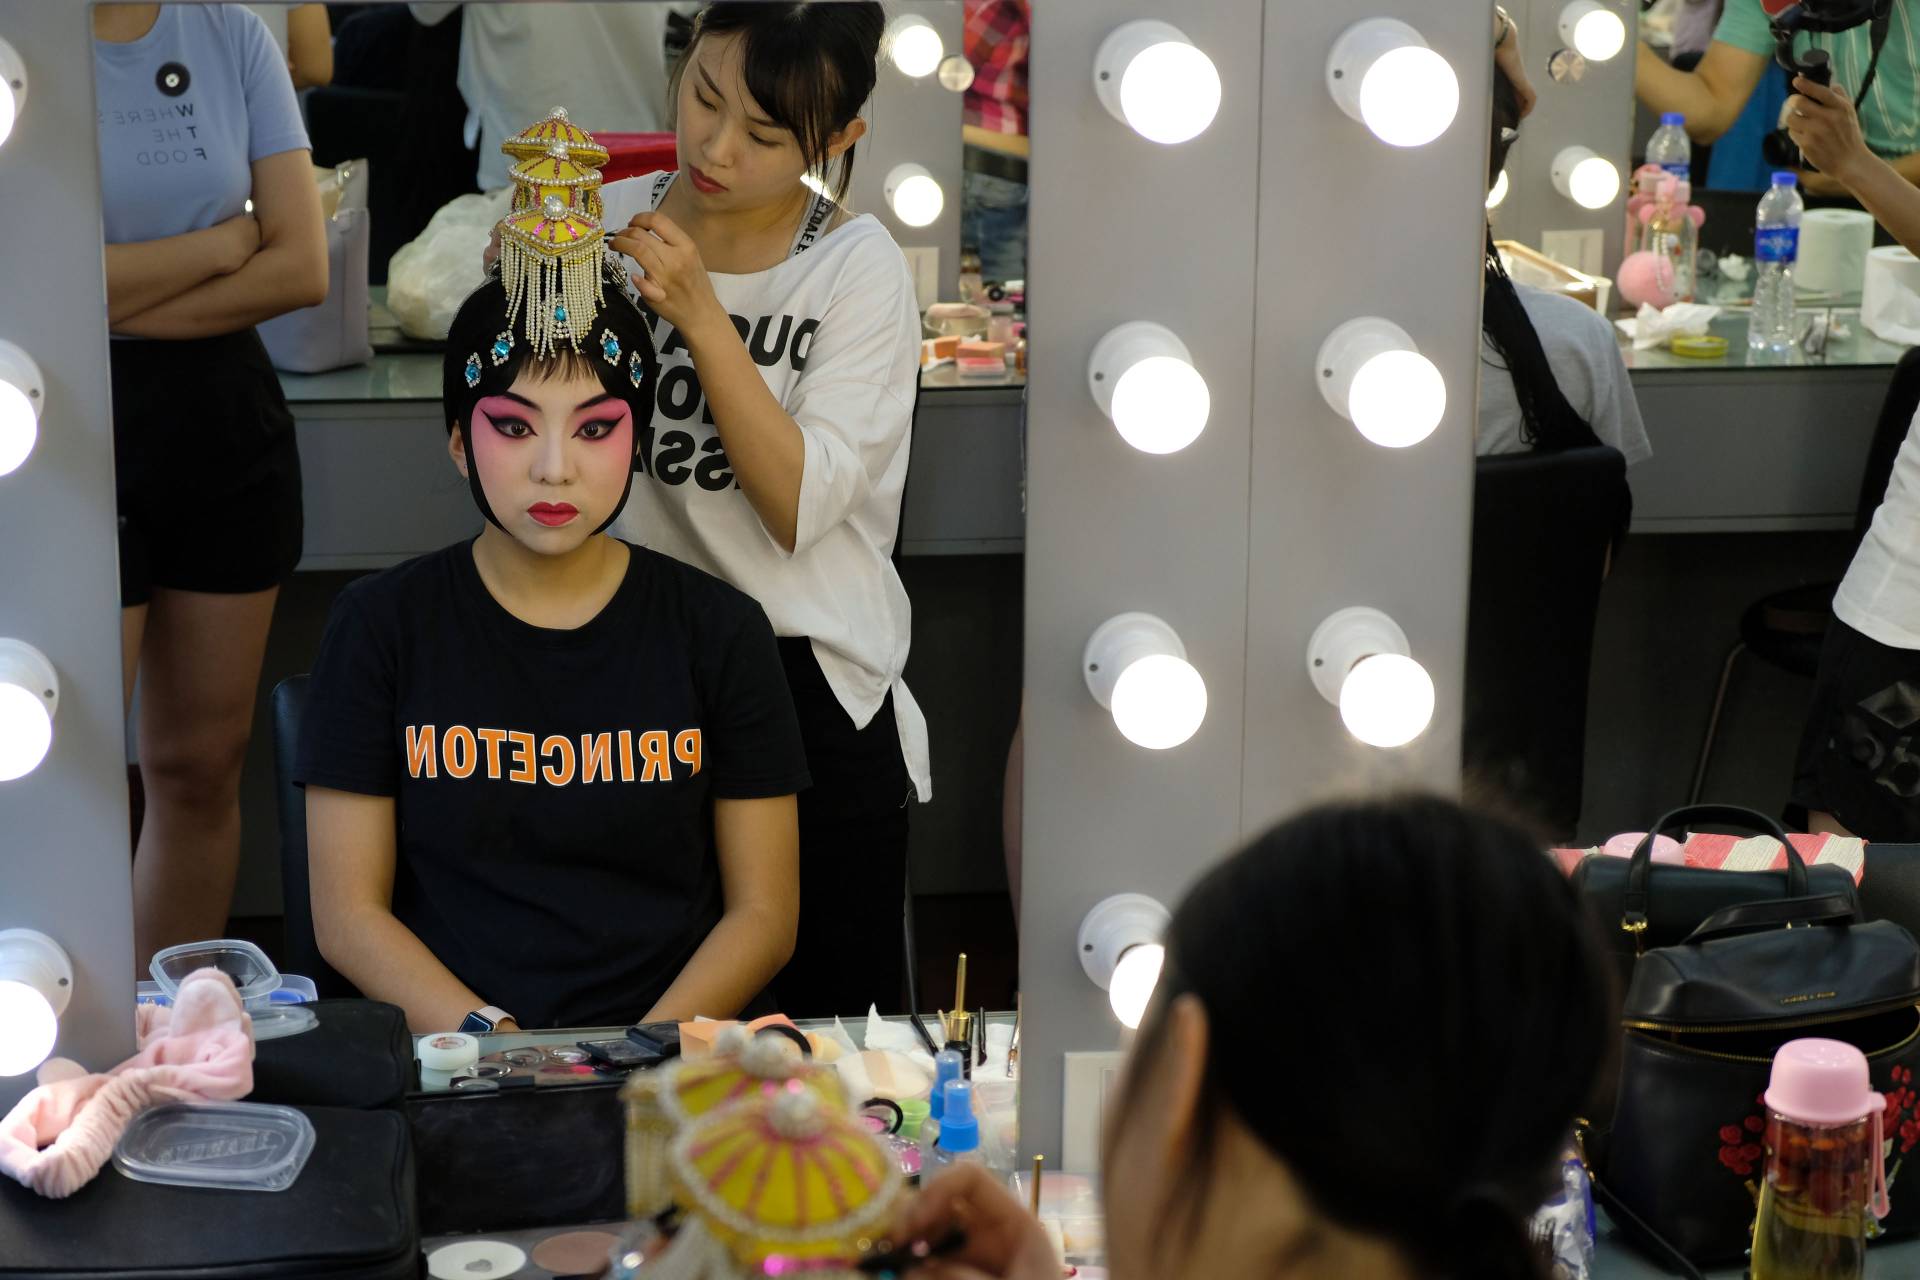 Reflection in mirror of student having makeup applied